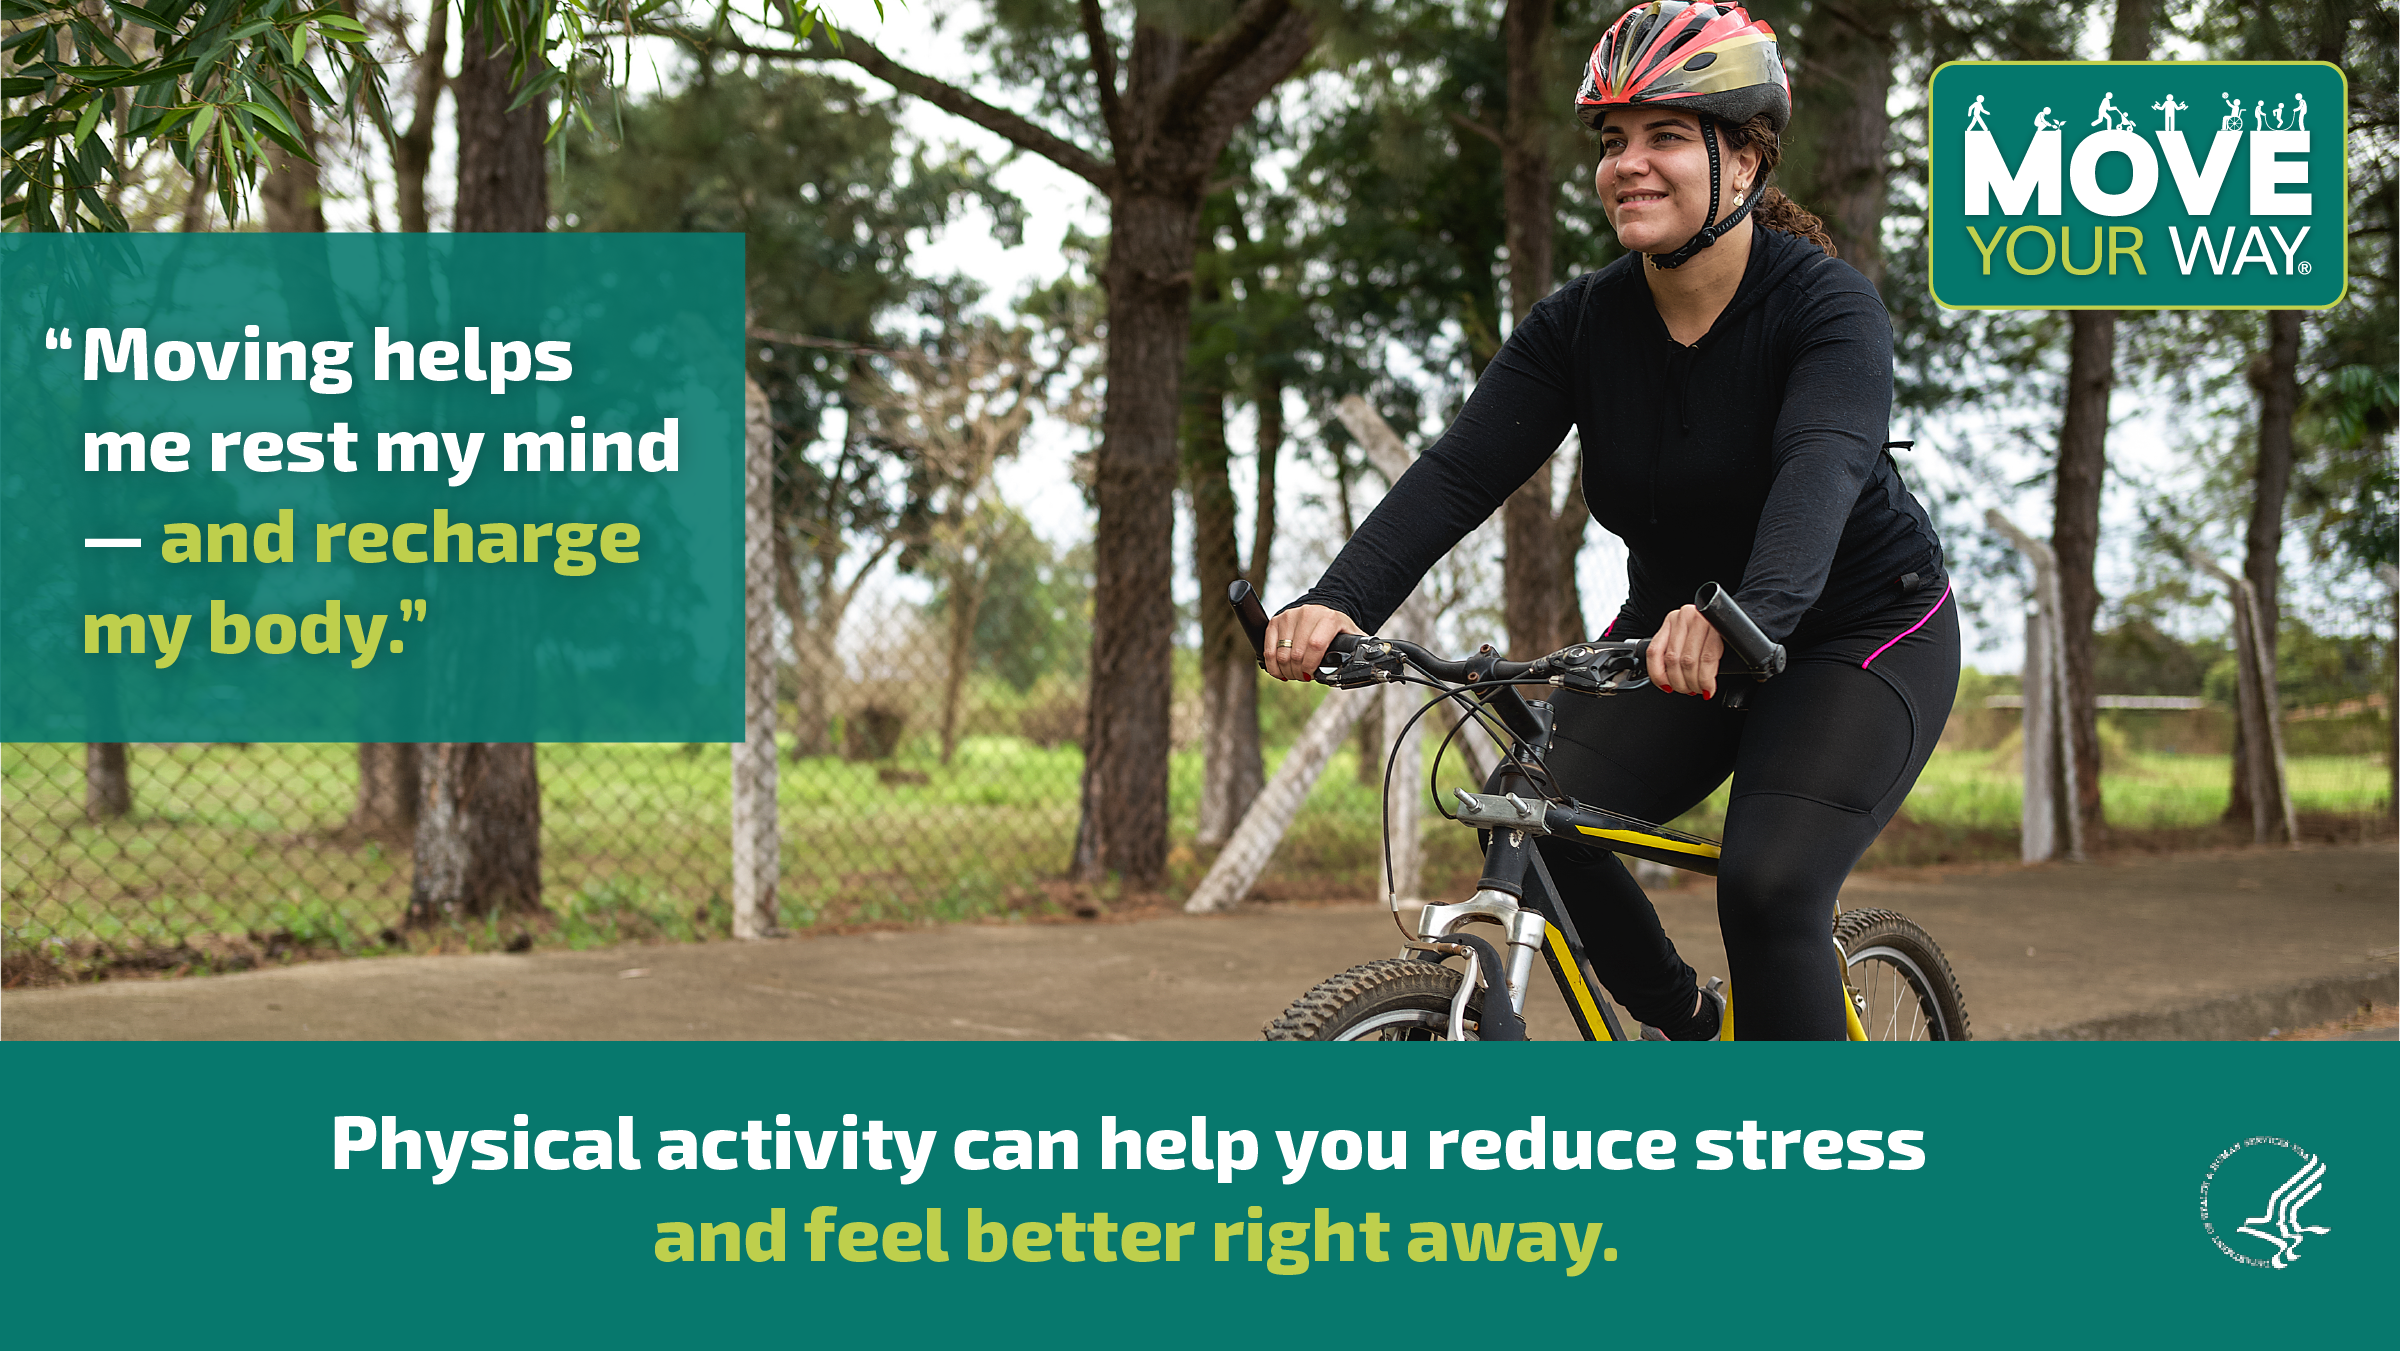 A woman with dark curly hair tied back in a ponytail wears a helmet and black athletic apparel while going for a bike ride on an outdoor path lined by trees. The image also shows the Move Your Way logo, and the following messages: "Moving helps me rest my mind – and recharge my body." and " Physical Activity can help you reduce stress and feel better right away."